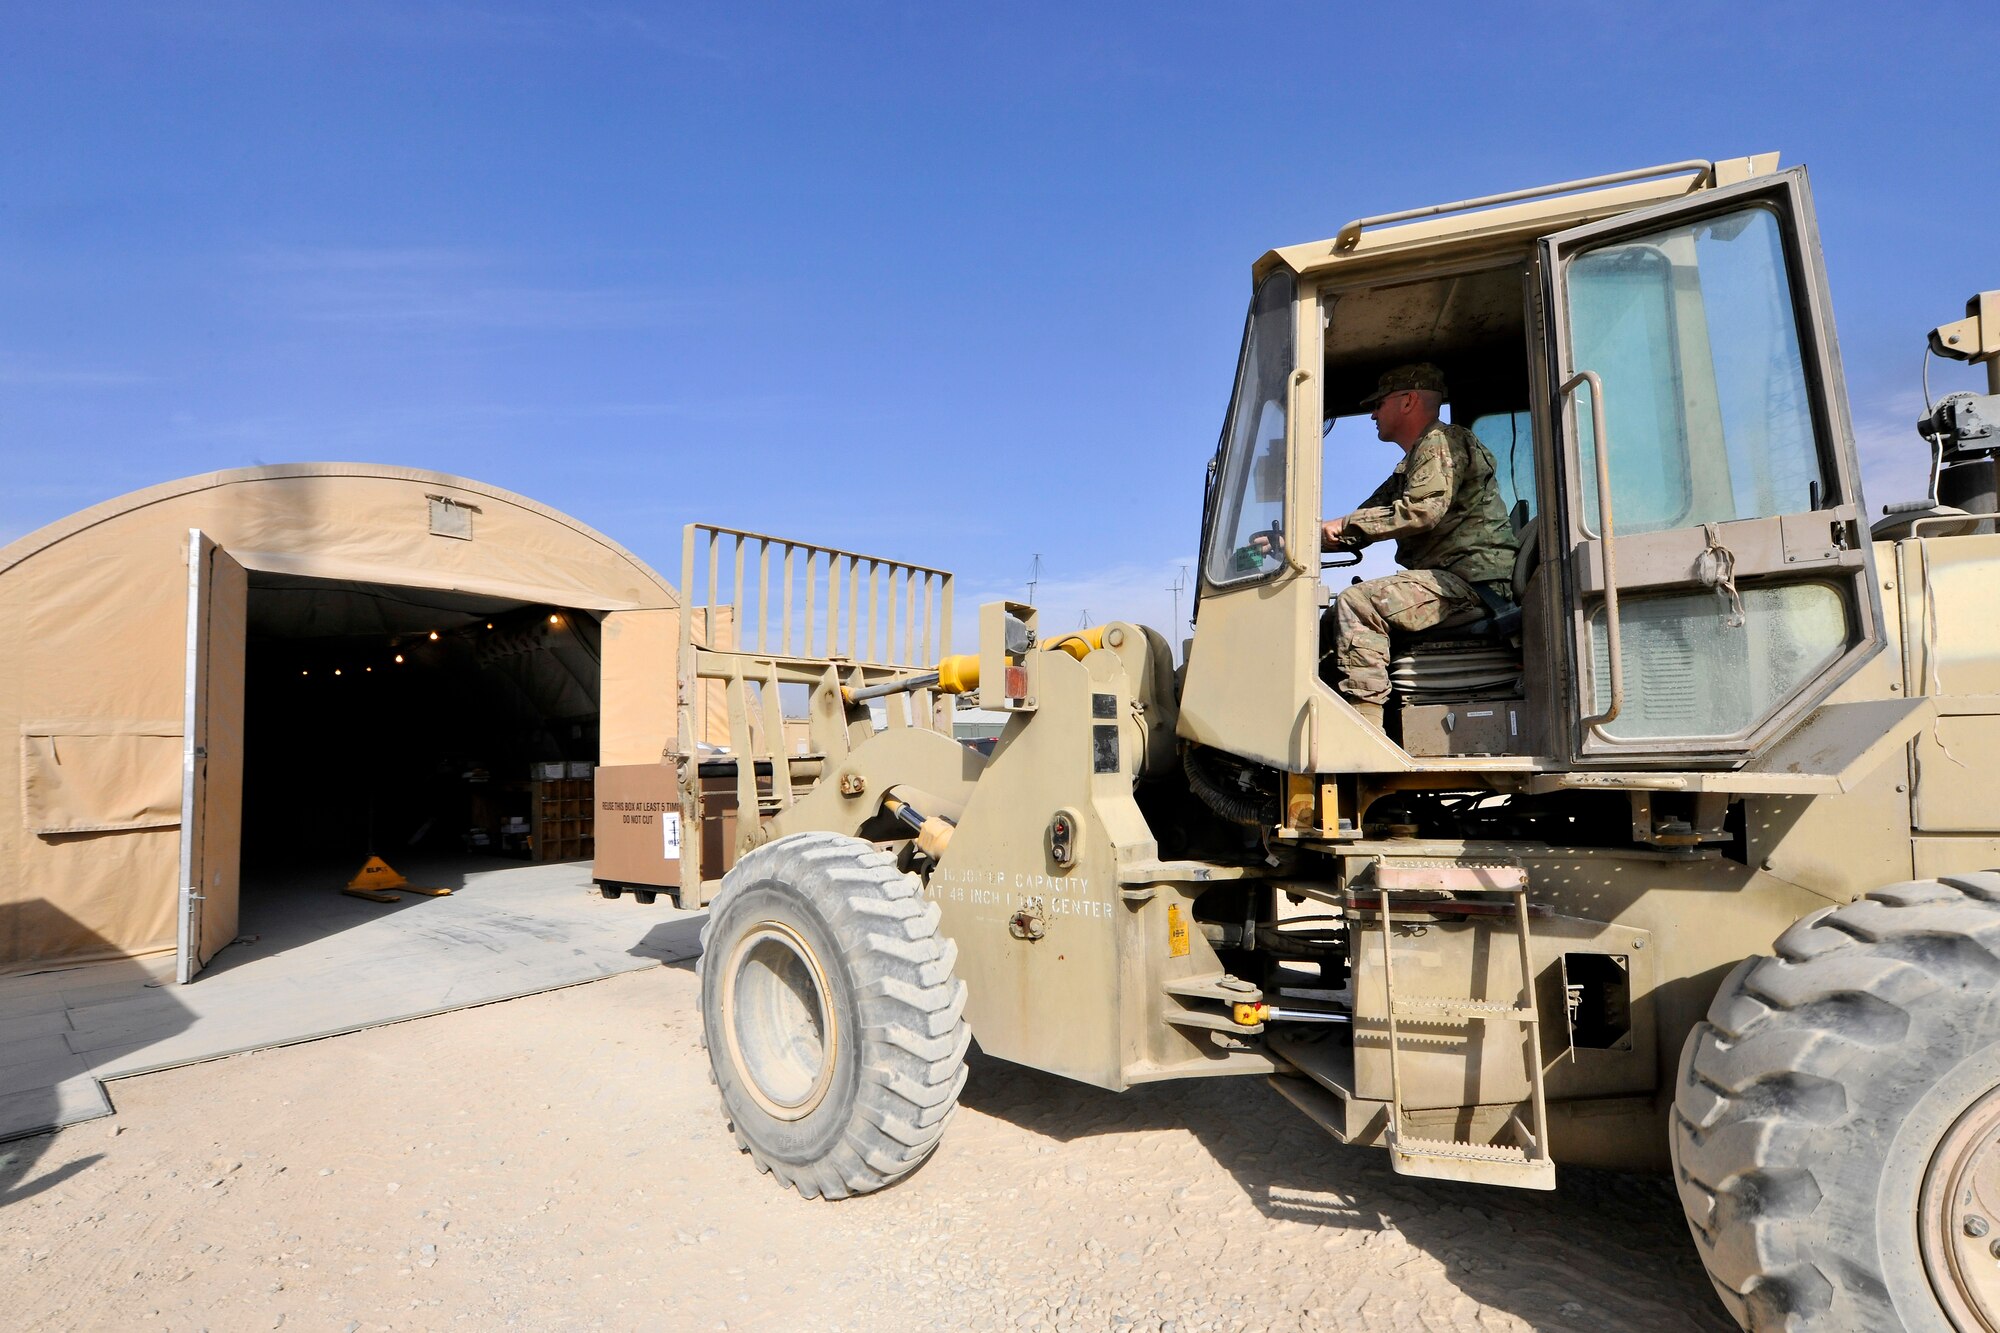 Tech. Sgt. Nathan Talavera, a member of the 455th Expeditionary Knowledge Operations Management office, carefully lowers a container of mail onto the receiving area of the postal annex at Bagram Airfield, Afghanistan, Nov. 15, 2012.  BAF Airmen receive an average of 18 containers of mail per day and more than 35 containers during the holiday season. (U.S. Air Force photo/Senior Airman Chris Willis)